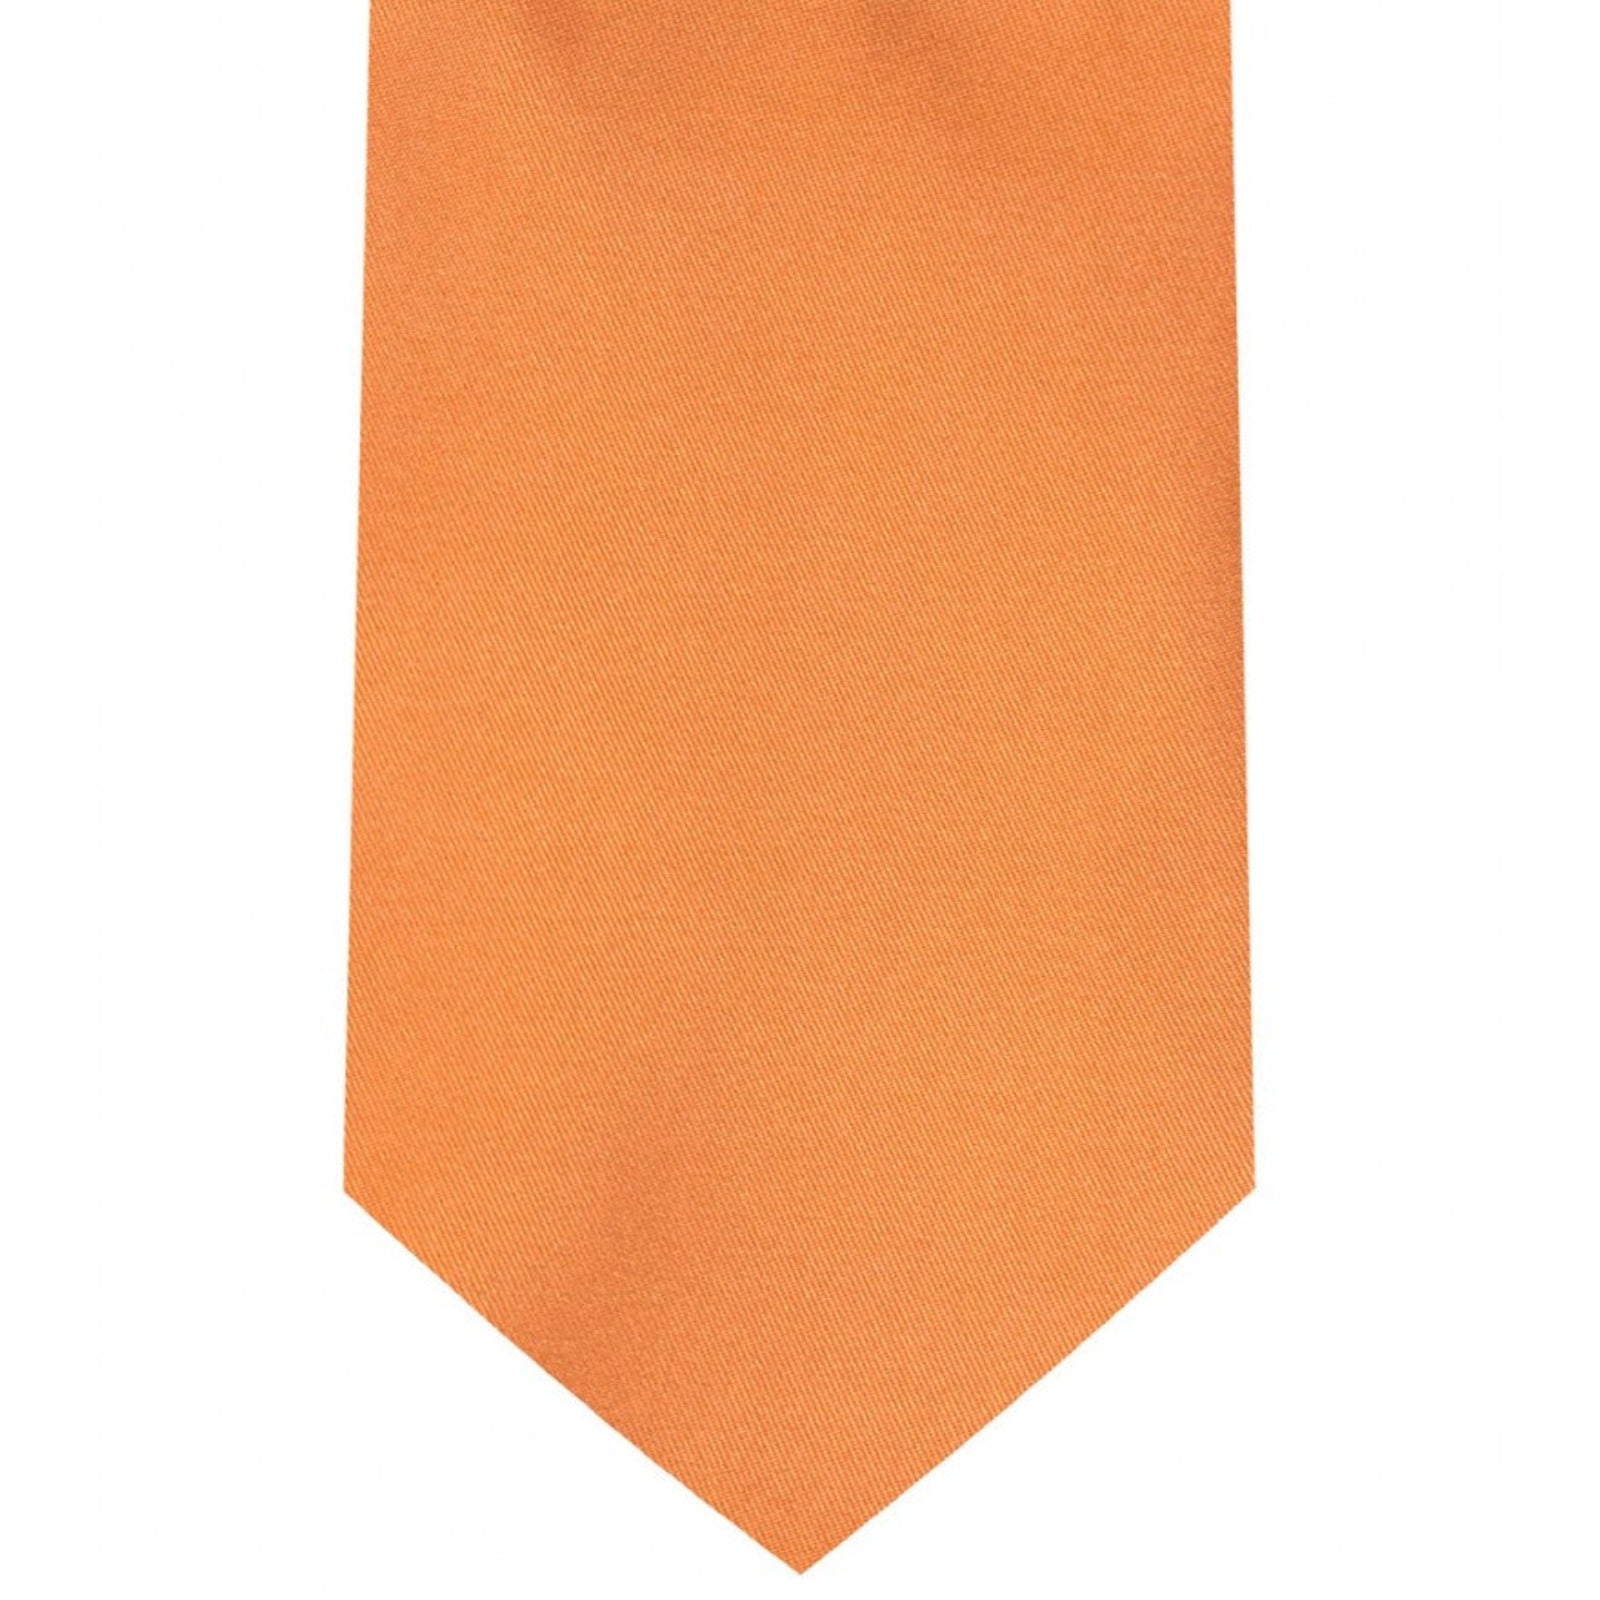 Classic Salmon Orange Tie Regular width 3.5 inches With Matching Pocket Square | KCT Menswear 